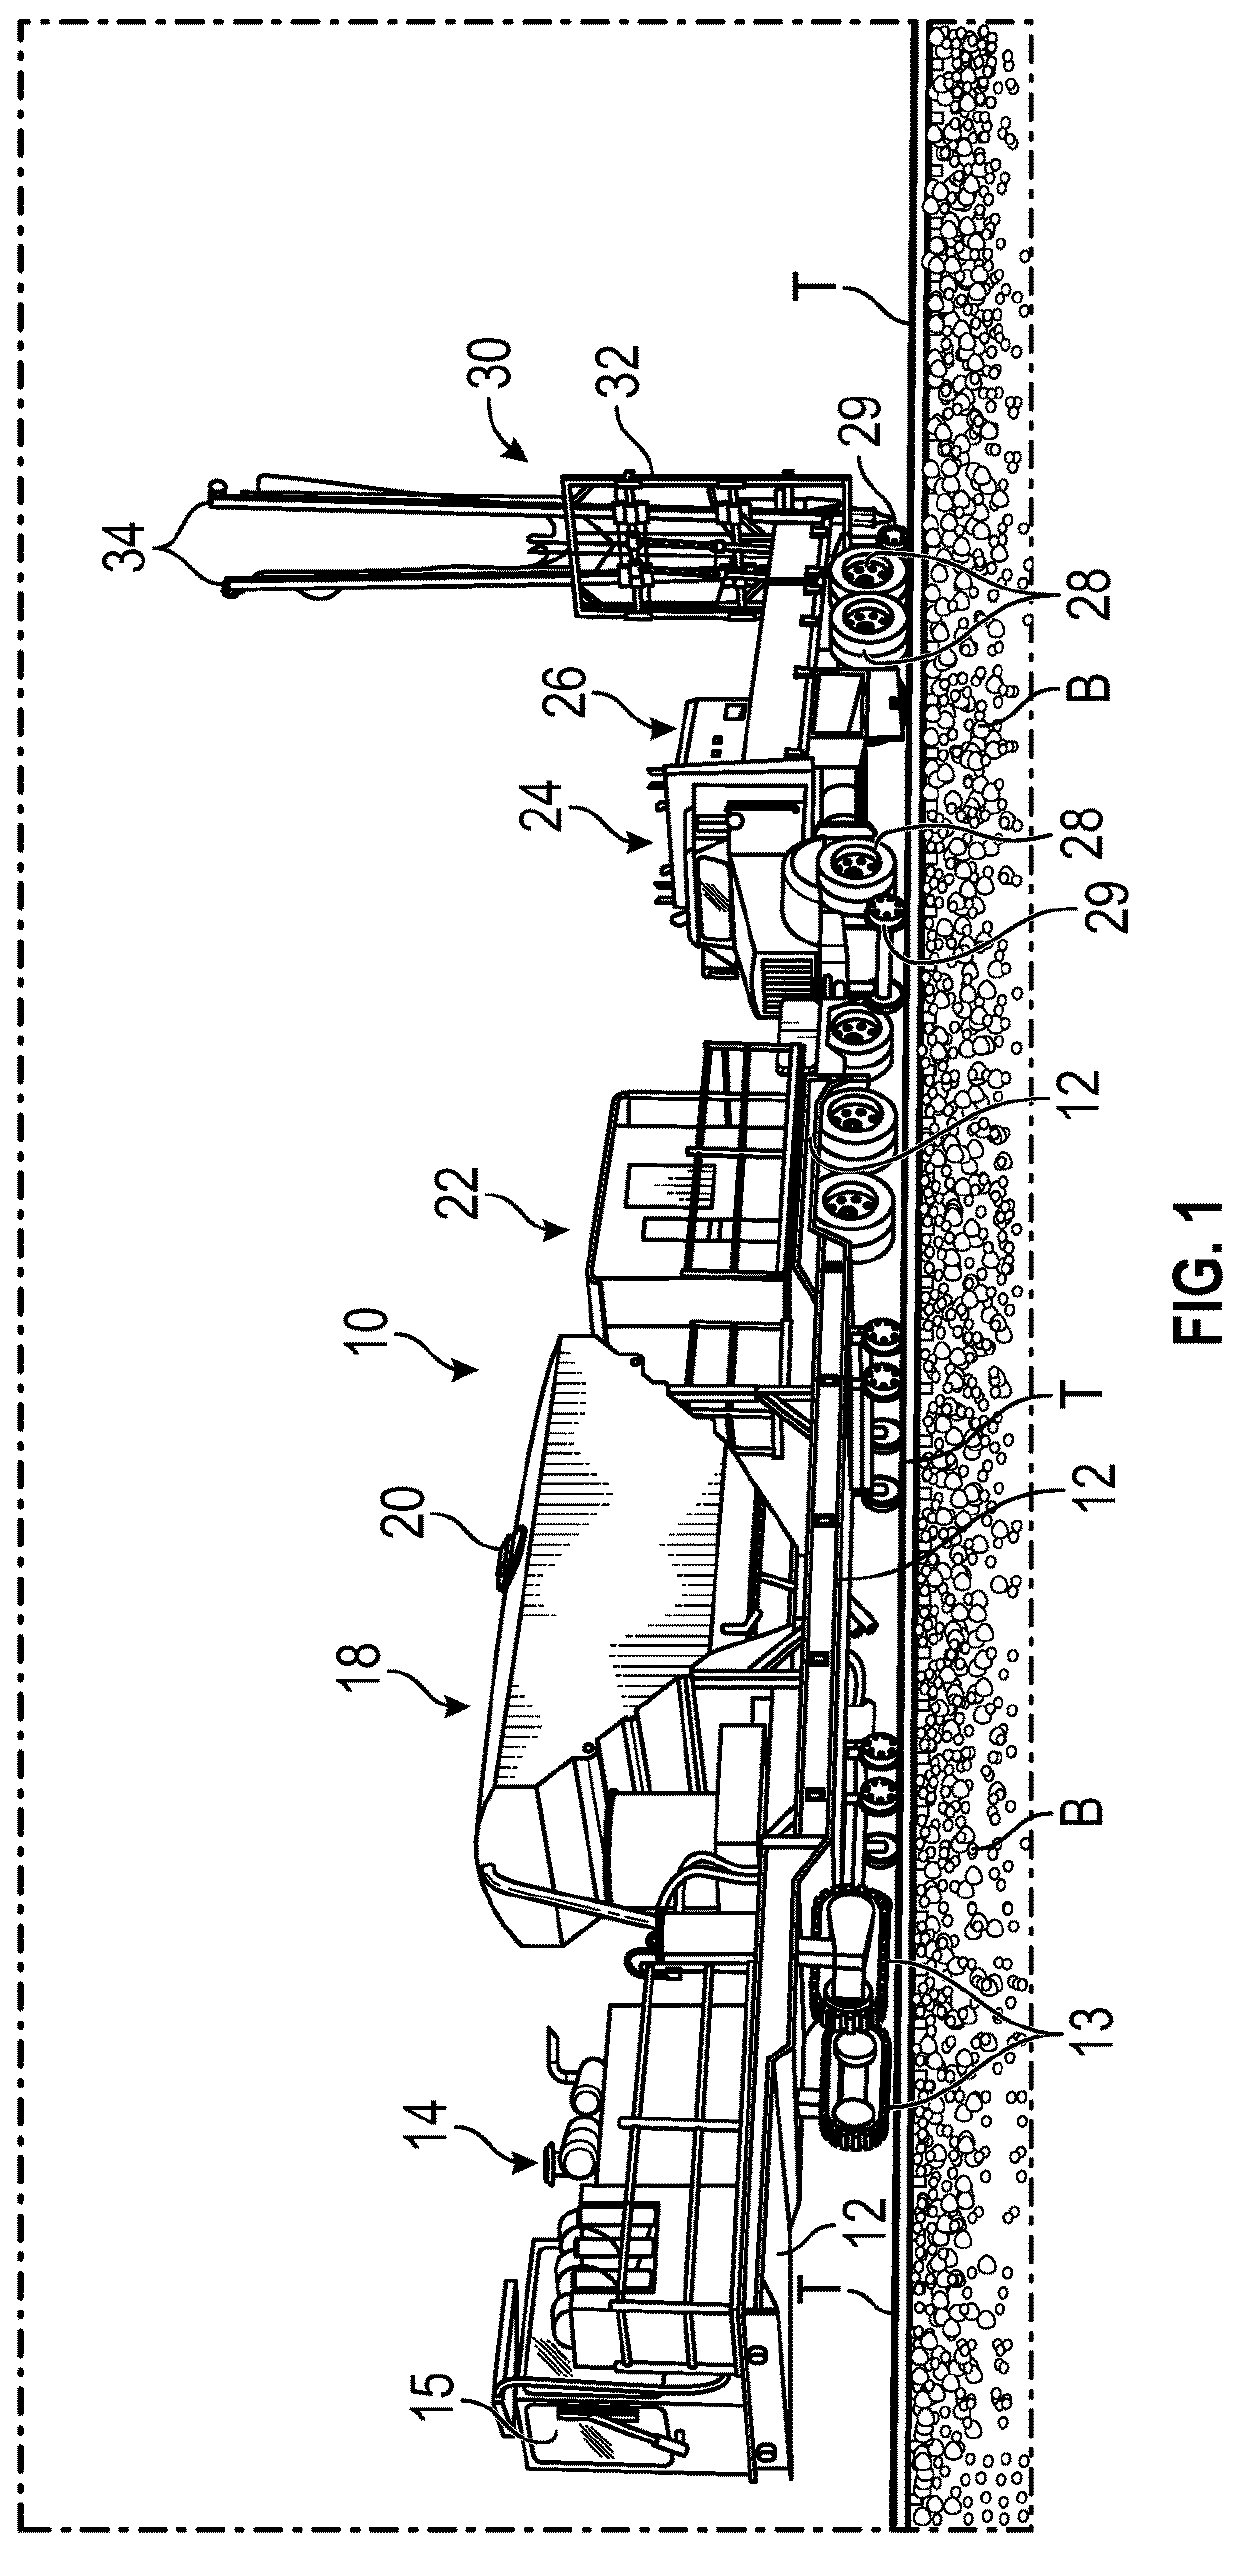 System and method for sub-grade stabilization of railroad bed